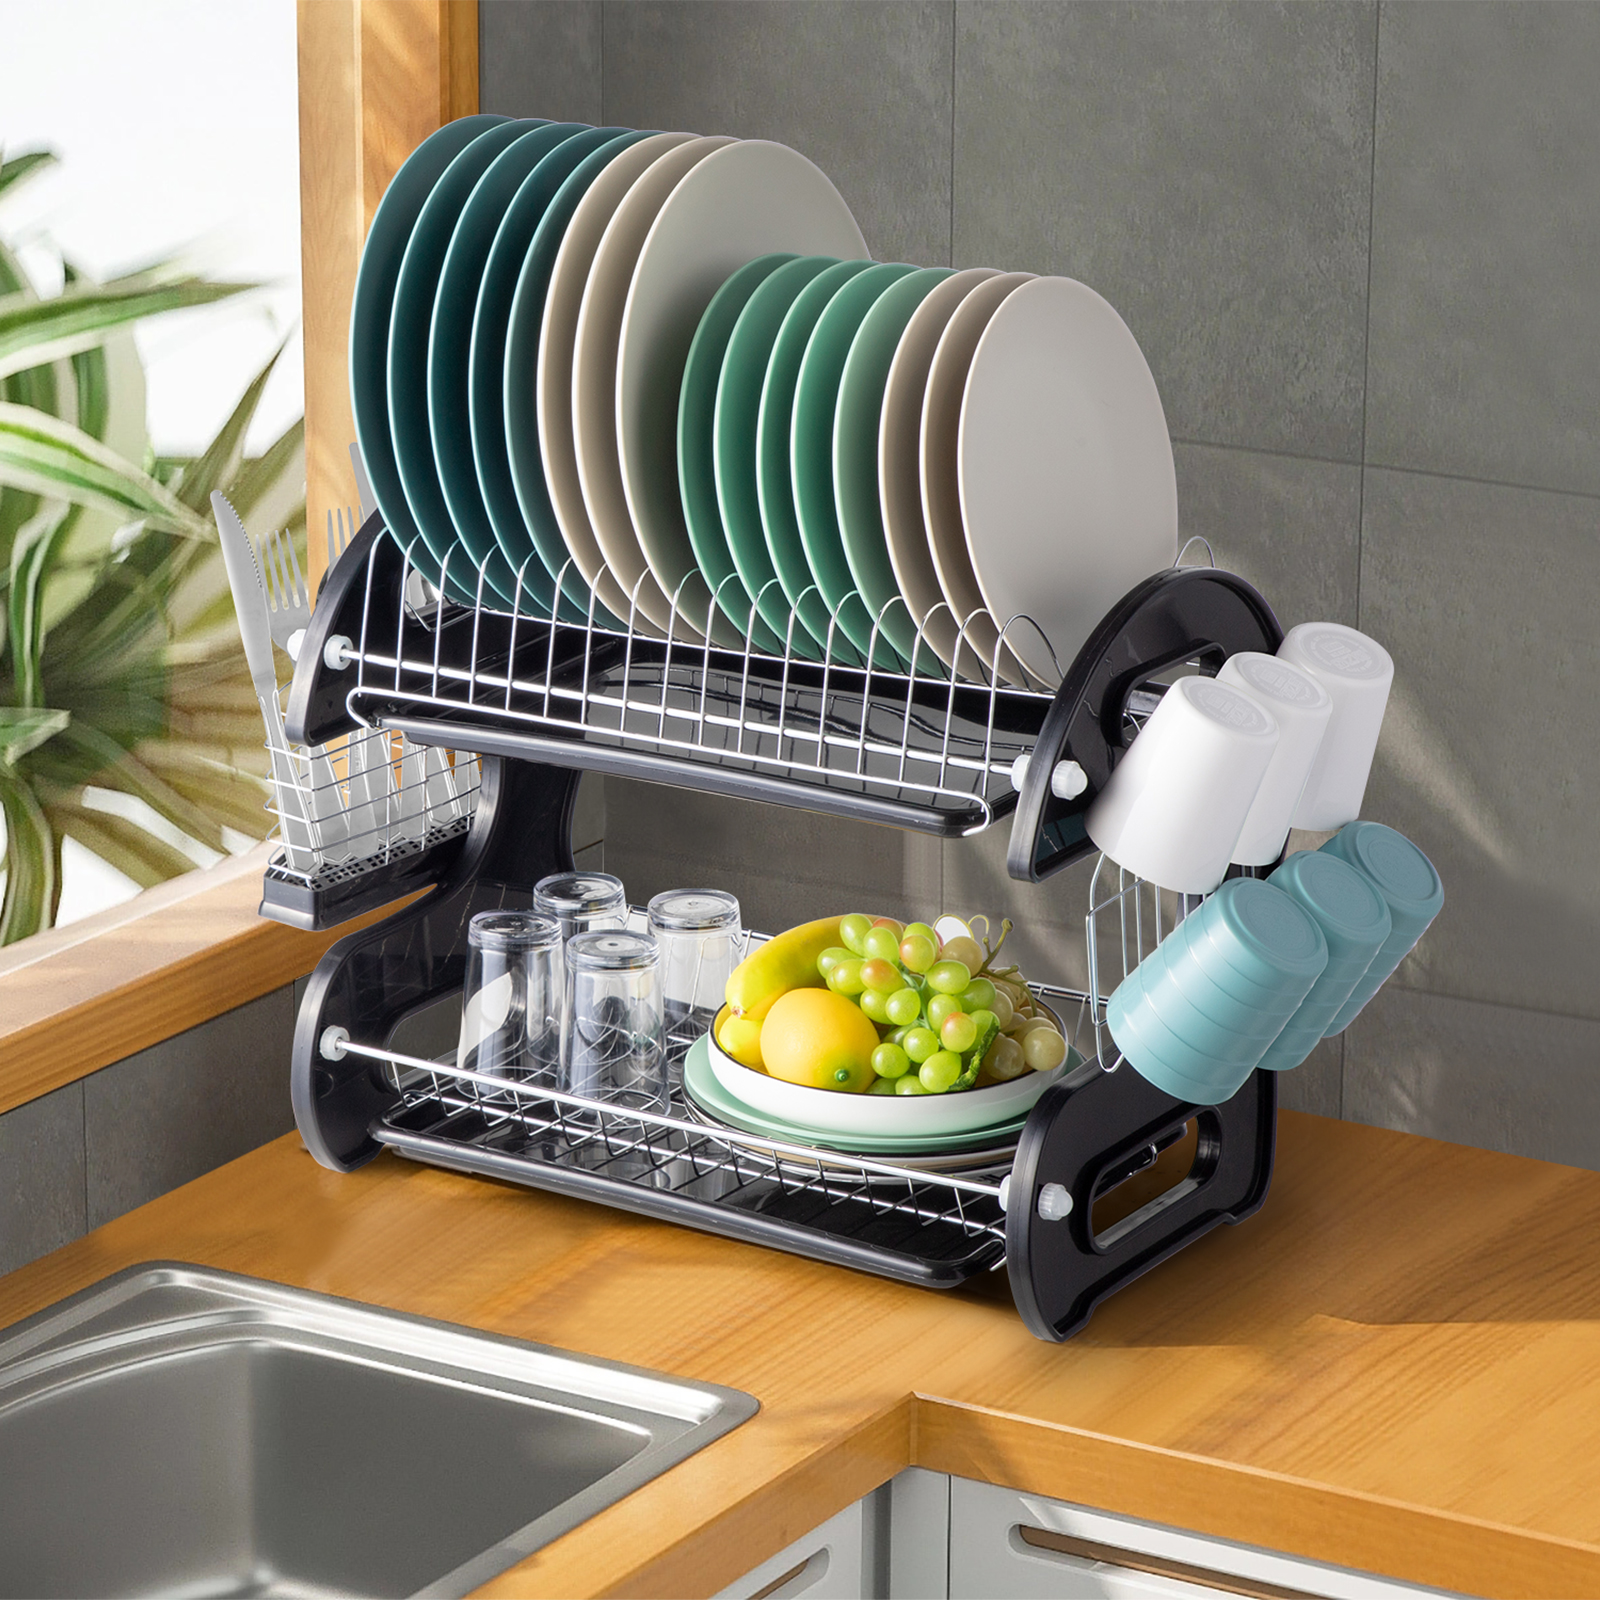 Ktaxon 2 Tier Dish Drainer Drying Rack Large Capacity Kitchen Storage Stainless Steel Holder,Washing Organizer - Overall Dimensions: 22.83" x 11" x 14.57" (L x W x H) - image 4 of 10